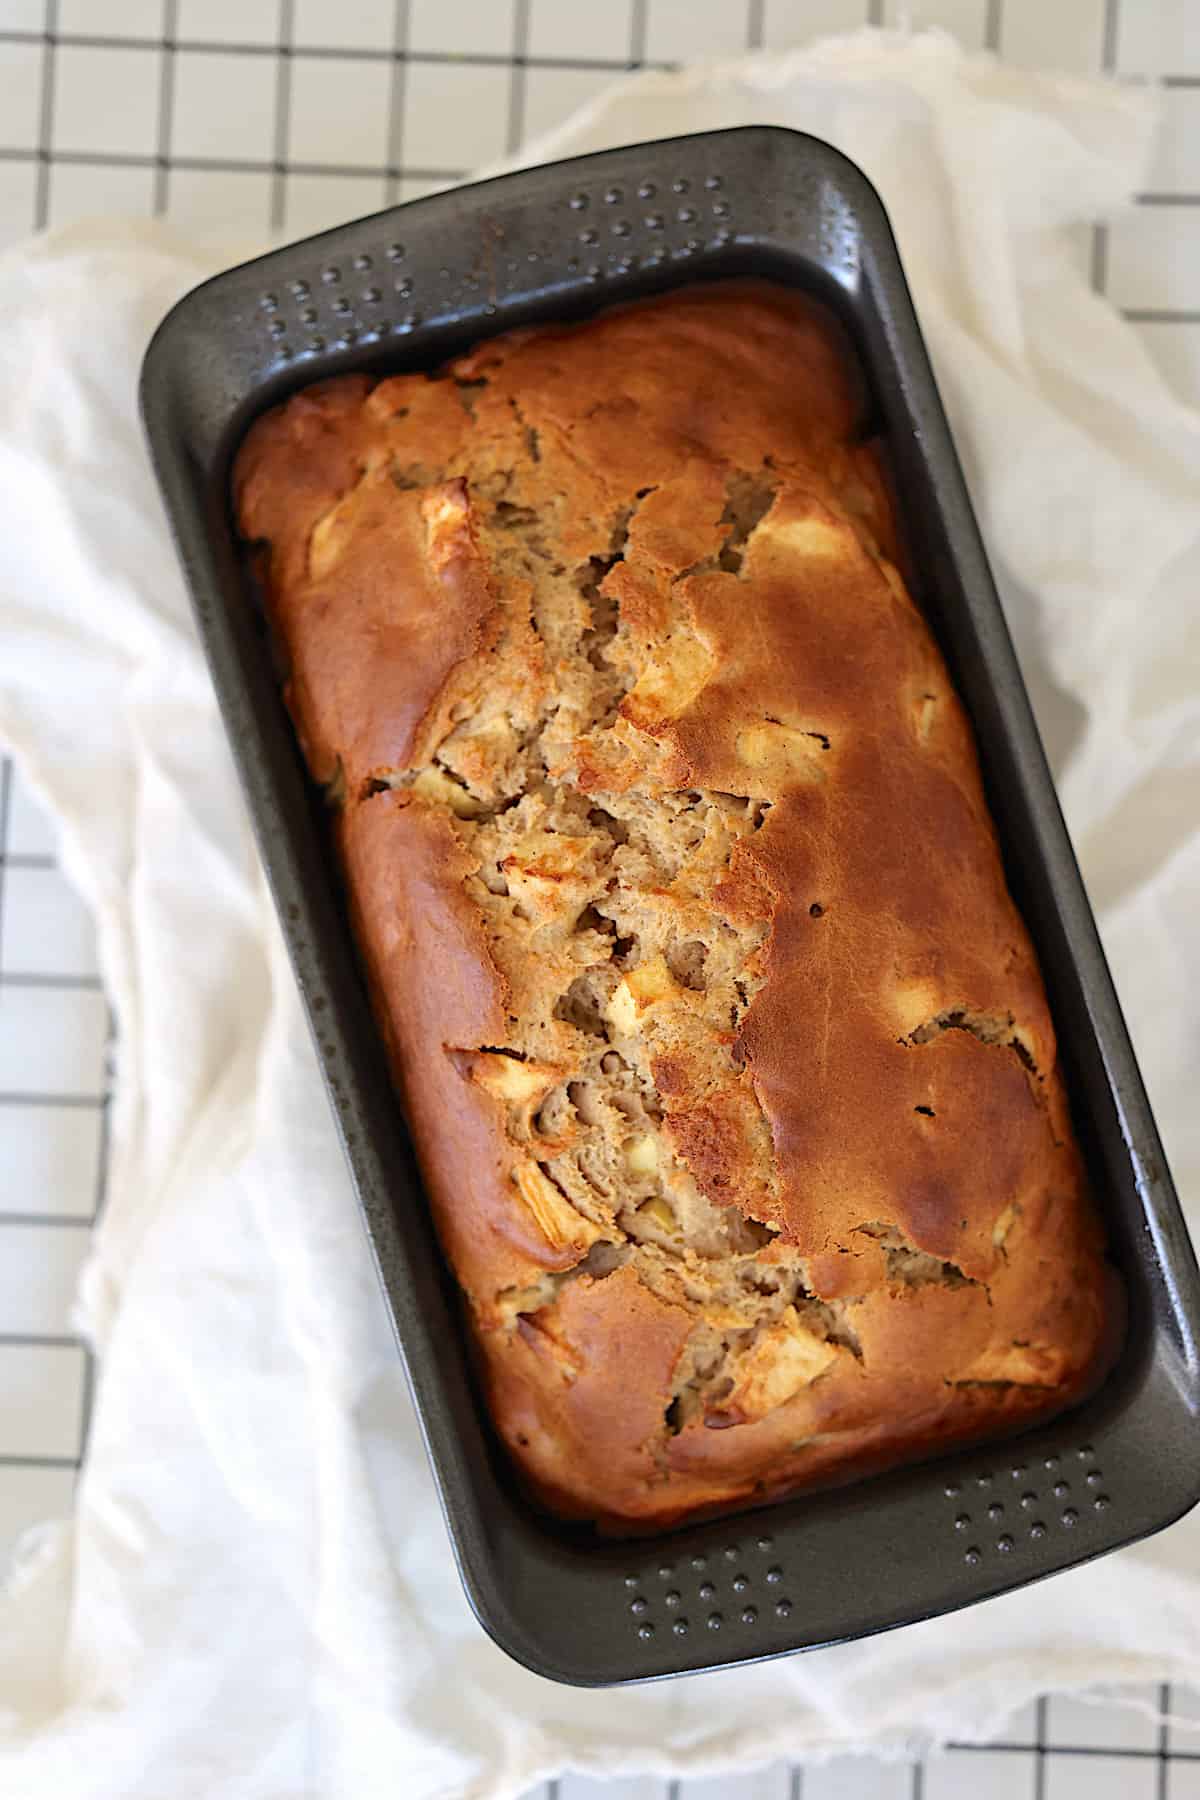 cooked apple loaf in a bread pan